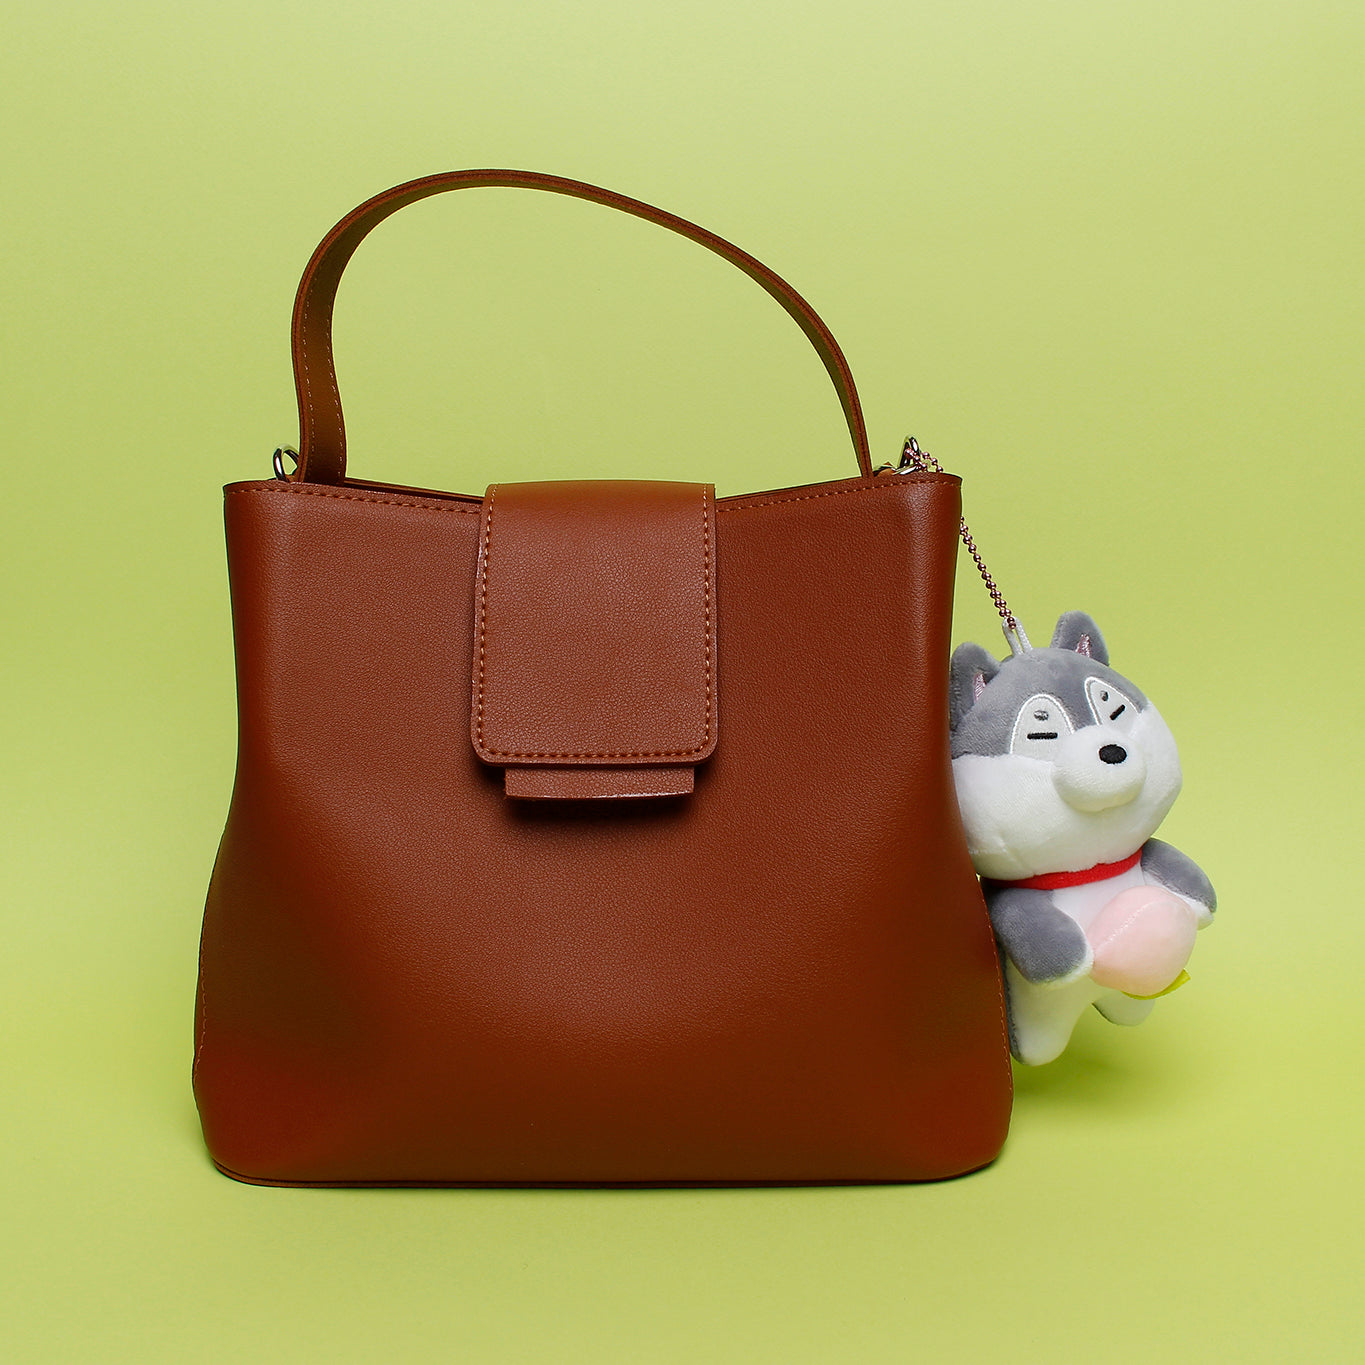 Grey shiba with peach keyring plush attached to brown purse on lime green background.